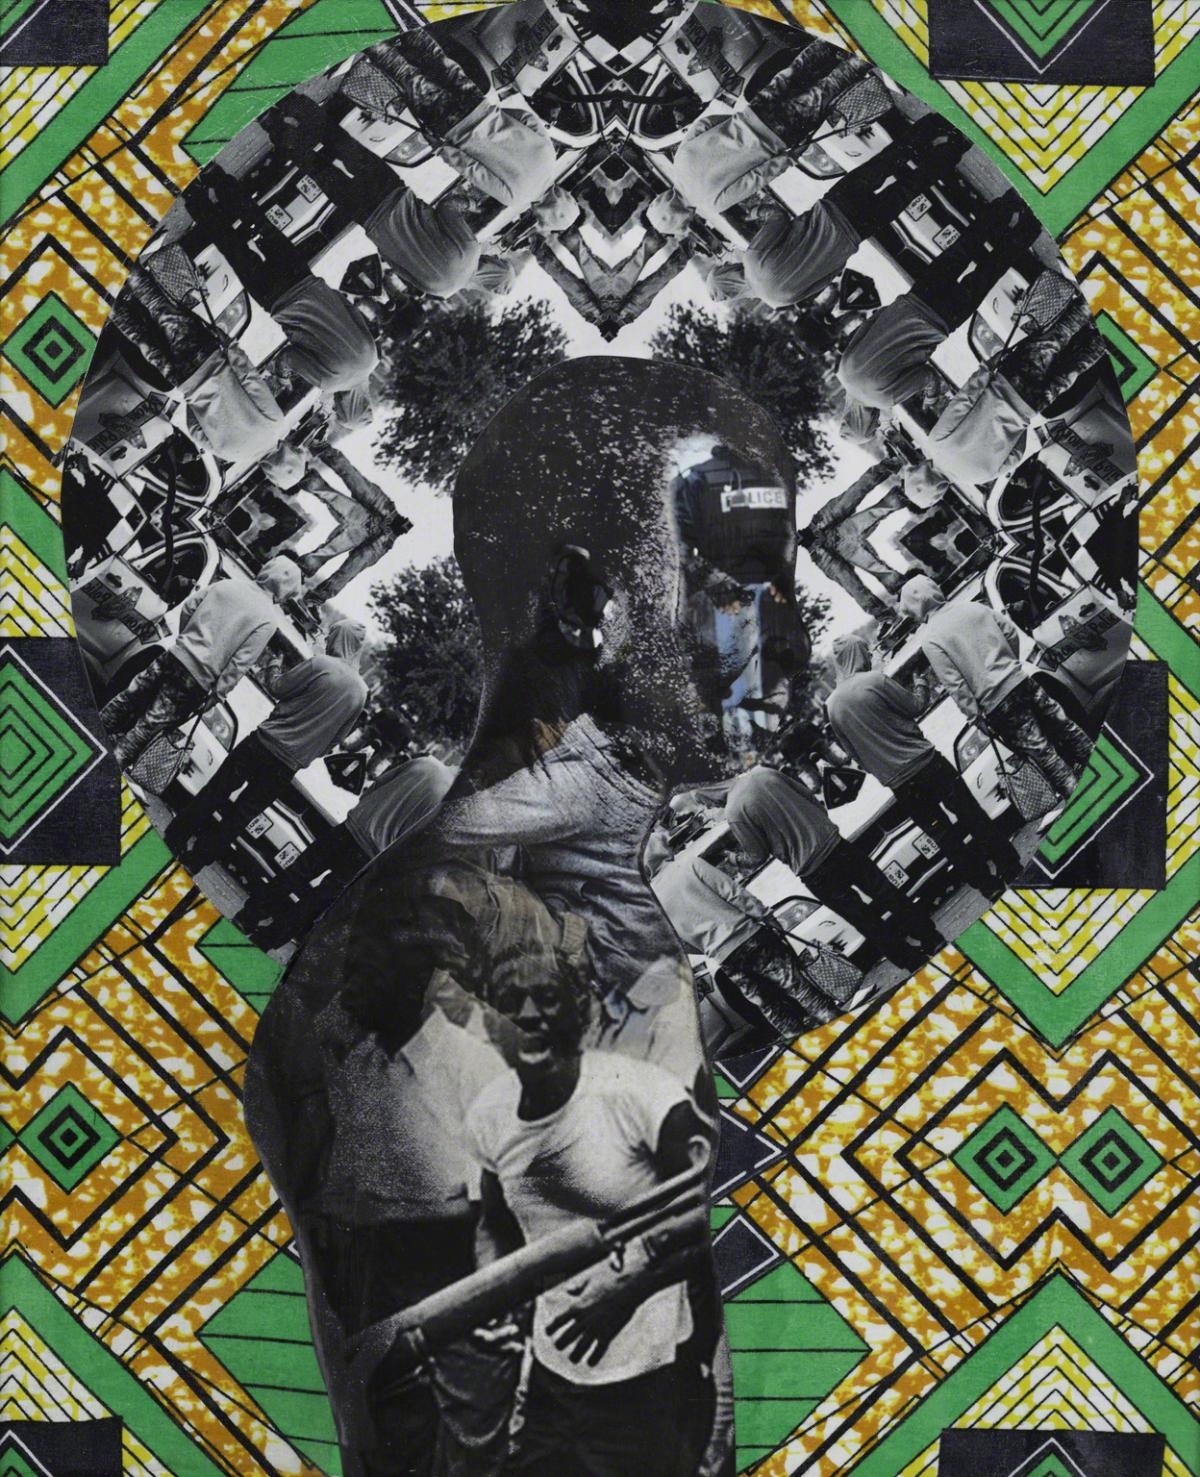 Image of a black man in profile with a halo superimposed with various images set against green and yellow diamond patterns 